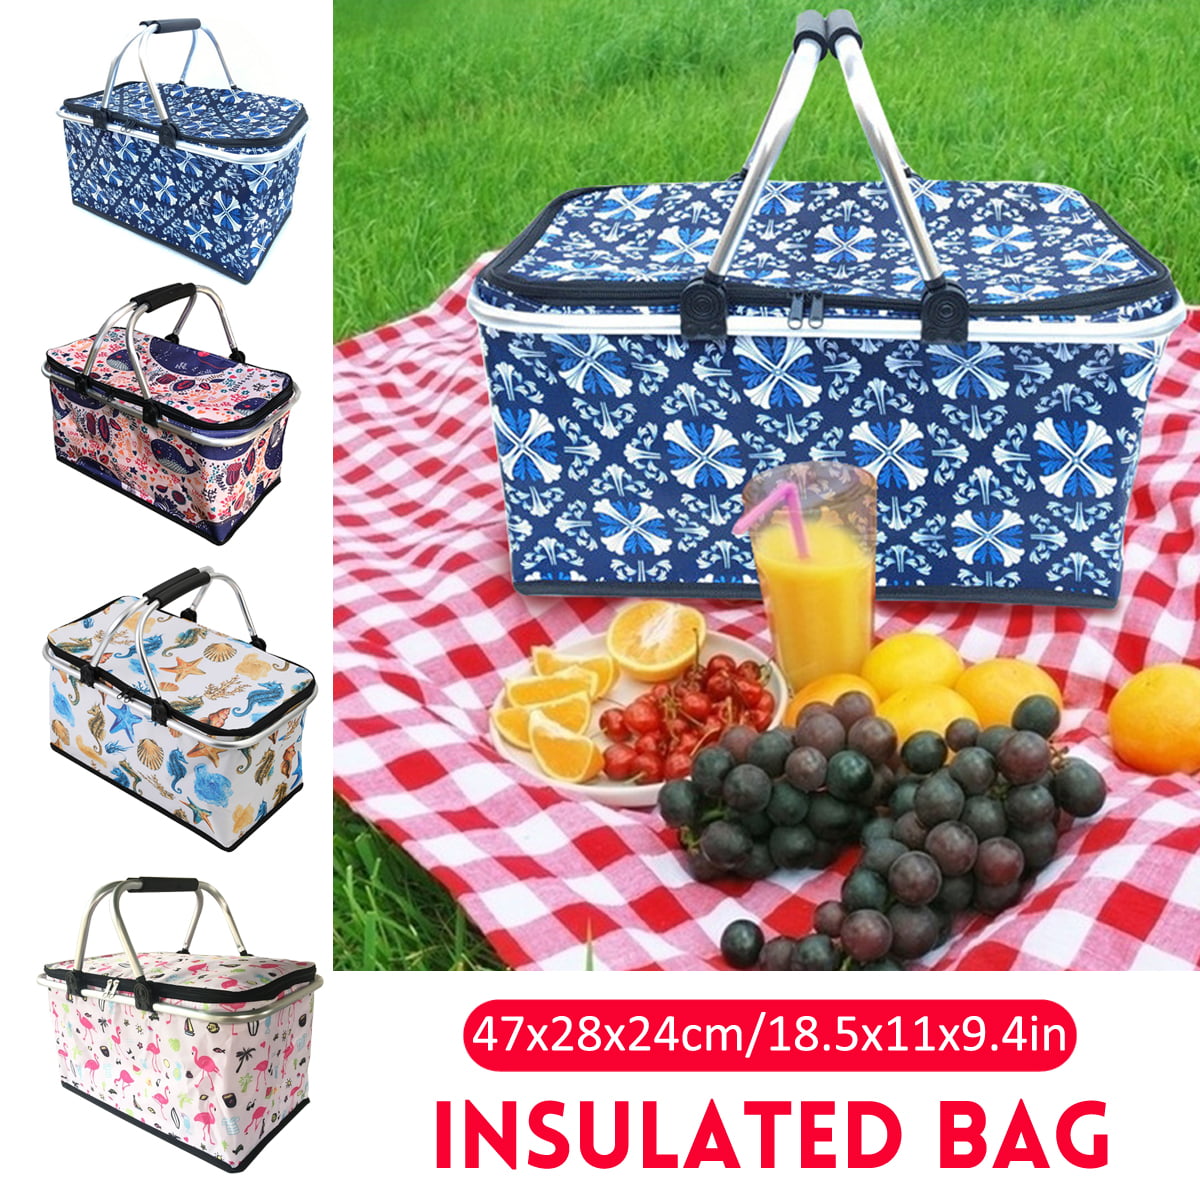 Outdoor Picnic Basket Insulated Picnic Basket Foldable Portable Collapsible Lunch Bag for Camping Outdoor Picnic-Green